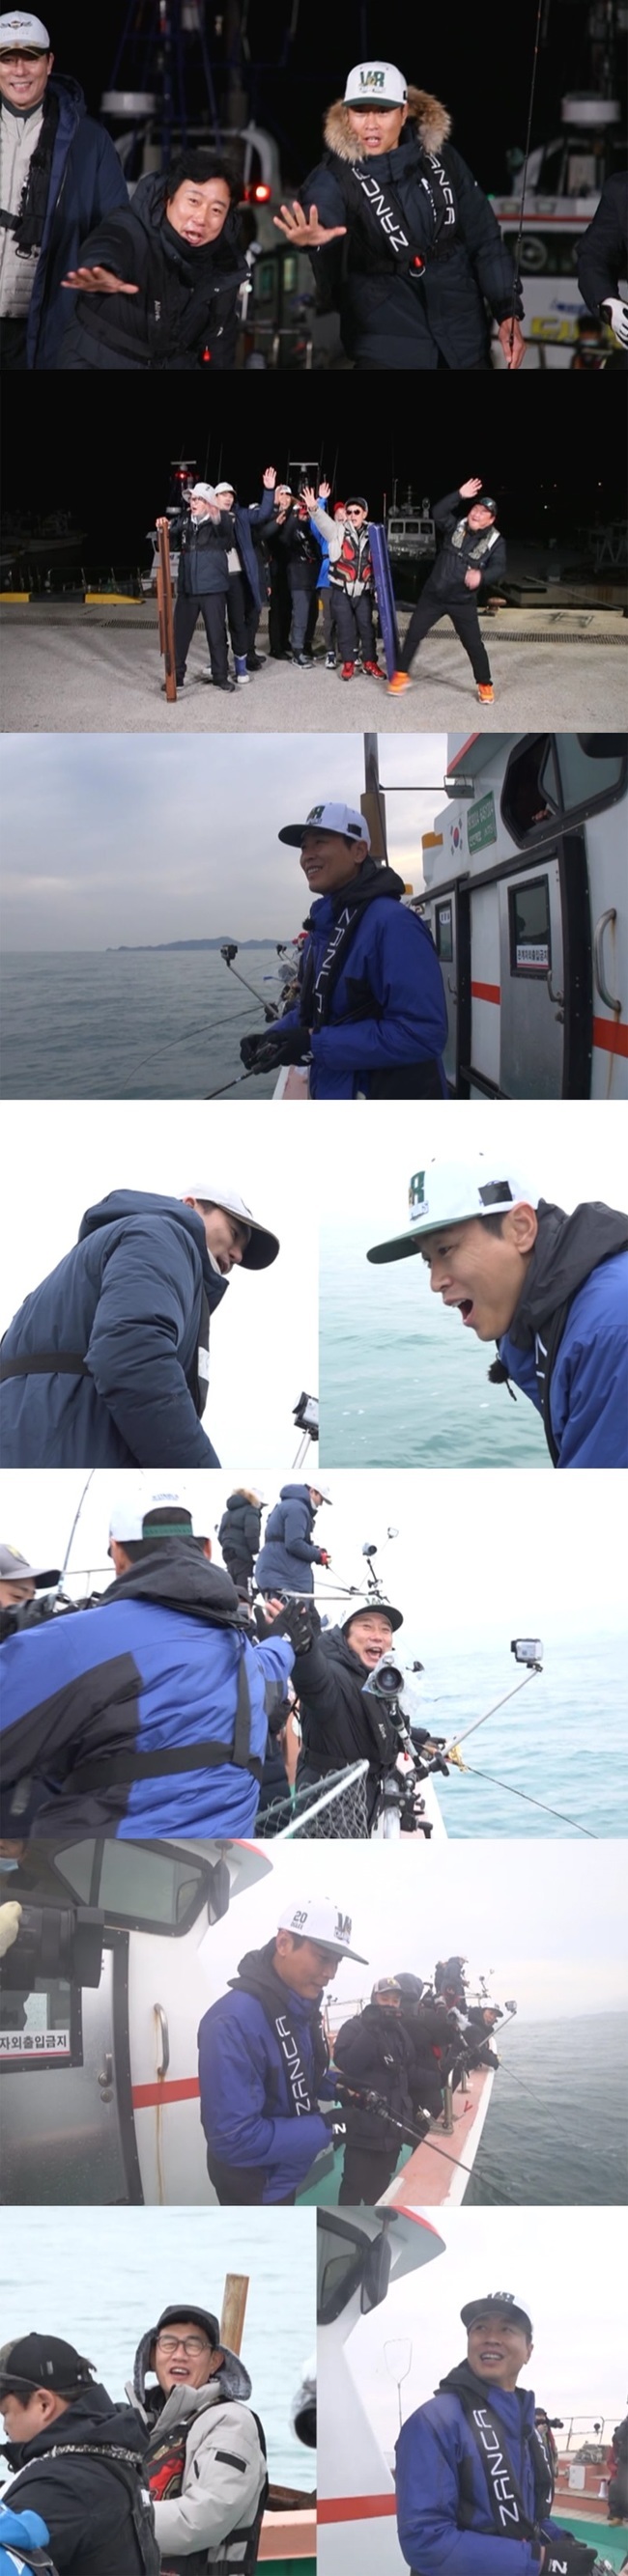 Lion King Lee Dong-gook reveals a strange fish suit.Lee Dong-gook will be playing a fishing match in Goheung, South Jeolla Province, with guests at the 56th Channel A entertainment program, Follow Me, City Fisherman 2 (hereinafter referred to as City Fisherman 2), which will be broadcast on January 14.Lee Dong-gook, who successfully completed his first fishing challenge with LTE class fast adaptability in the last broadcast, is attracted to the attention that he received lipoplasts in the fishing on the day and revealed his unfavorable fish suit.Lee Dong-gook, who expressed his expectation and excitement before leaving the port, said, My eyes just opened up. He said, I should do the second half of today.Lee Dong-gook, who became a team with Lee Soo-geun, the second son of Yongwang, showed his breathing from the beginning, including wearing a hat.Lee Dong-gook showed embarrassment to the movement of the fishing rod that was heavy, and said, Wow, there was a fish suit.Lee Dong-gook, who was praised by Lee Kyung-kyu last week for seeming to have been caught in fishing, showed a brilliant appearance in a day and heard a praise from Lee Duk-hwa that Dongguk is good at fishing.Lee Dong-gook said, Wow, its big!I got it, viewers! And while continuing the exciting fishing, I shouted, Feel good, this! and focused everyones attention.In addition, Lee Soo-geun, who boasted a unique chemistry from the beginning, also received a series of lipoplasts, and Lee Dong-gook was said to have raised his mouth by shouting I met the team today.Lee Kyung-kyu, who became Lee Dong-gooks fishing Lean on Me in an emergency tutoring at night, gave a meaningful honey advice saying, Let the children not watch the broadcast.I am curious about the broadcast about what kind of conversation between Lean on Me and the student would have come and gone.